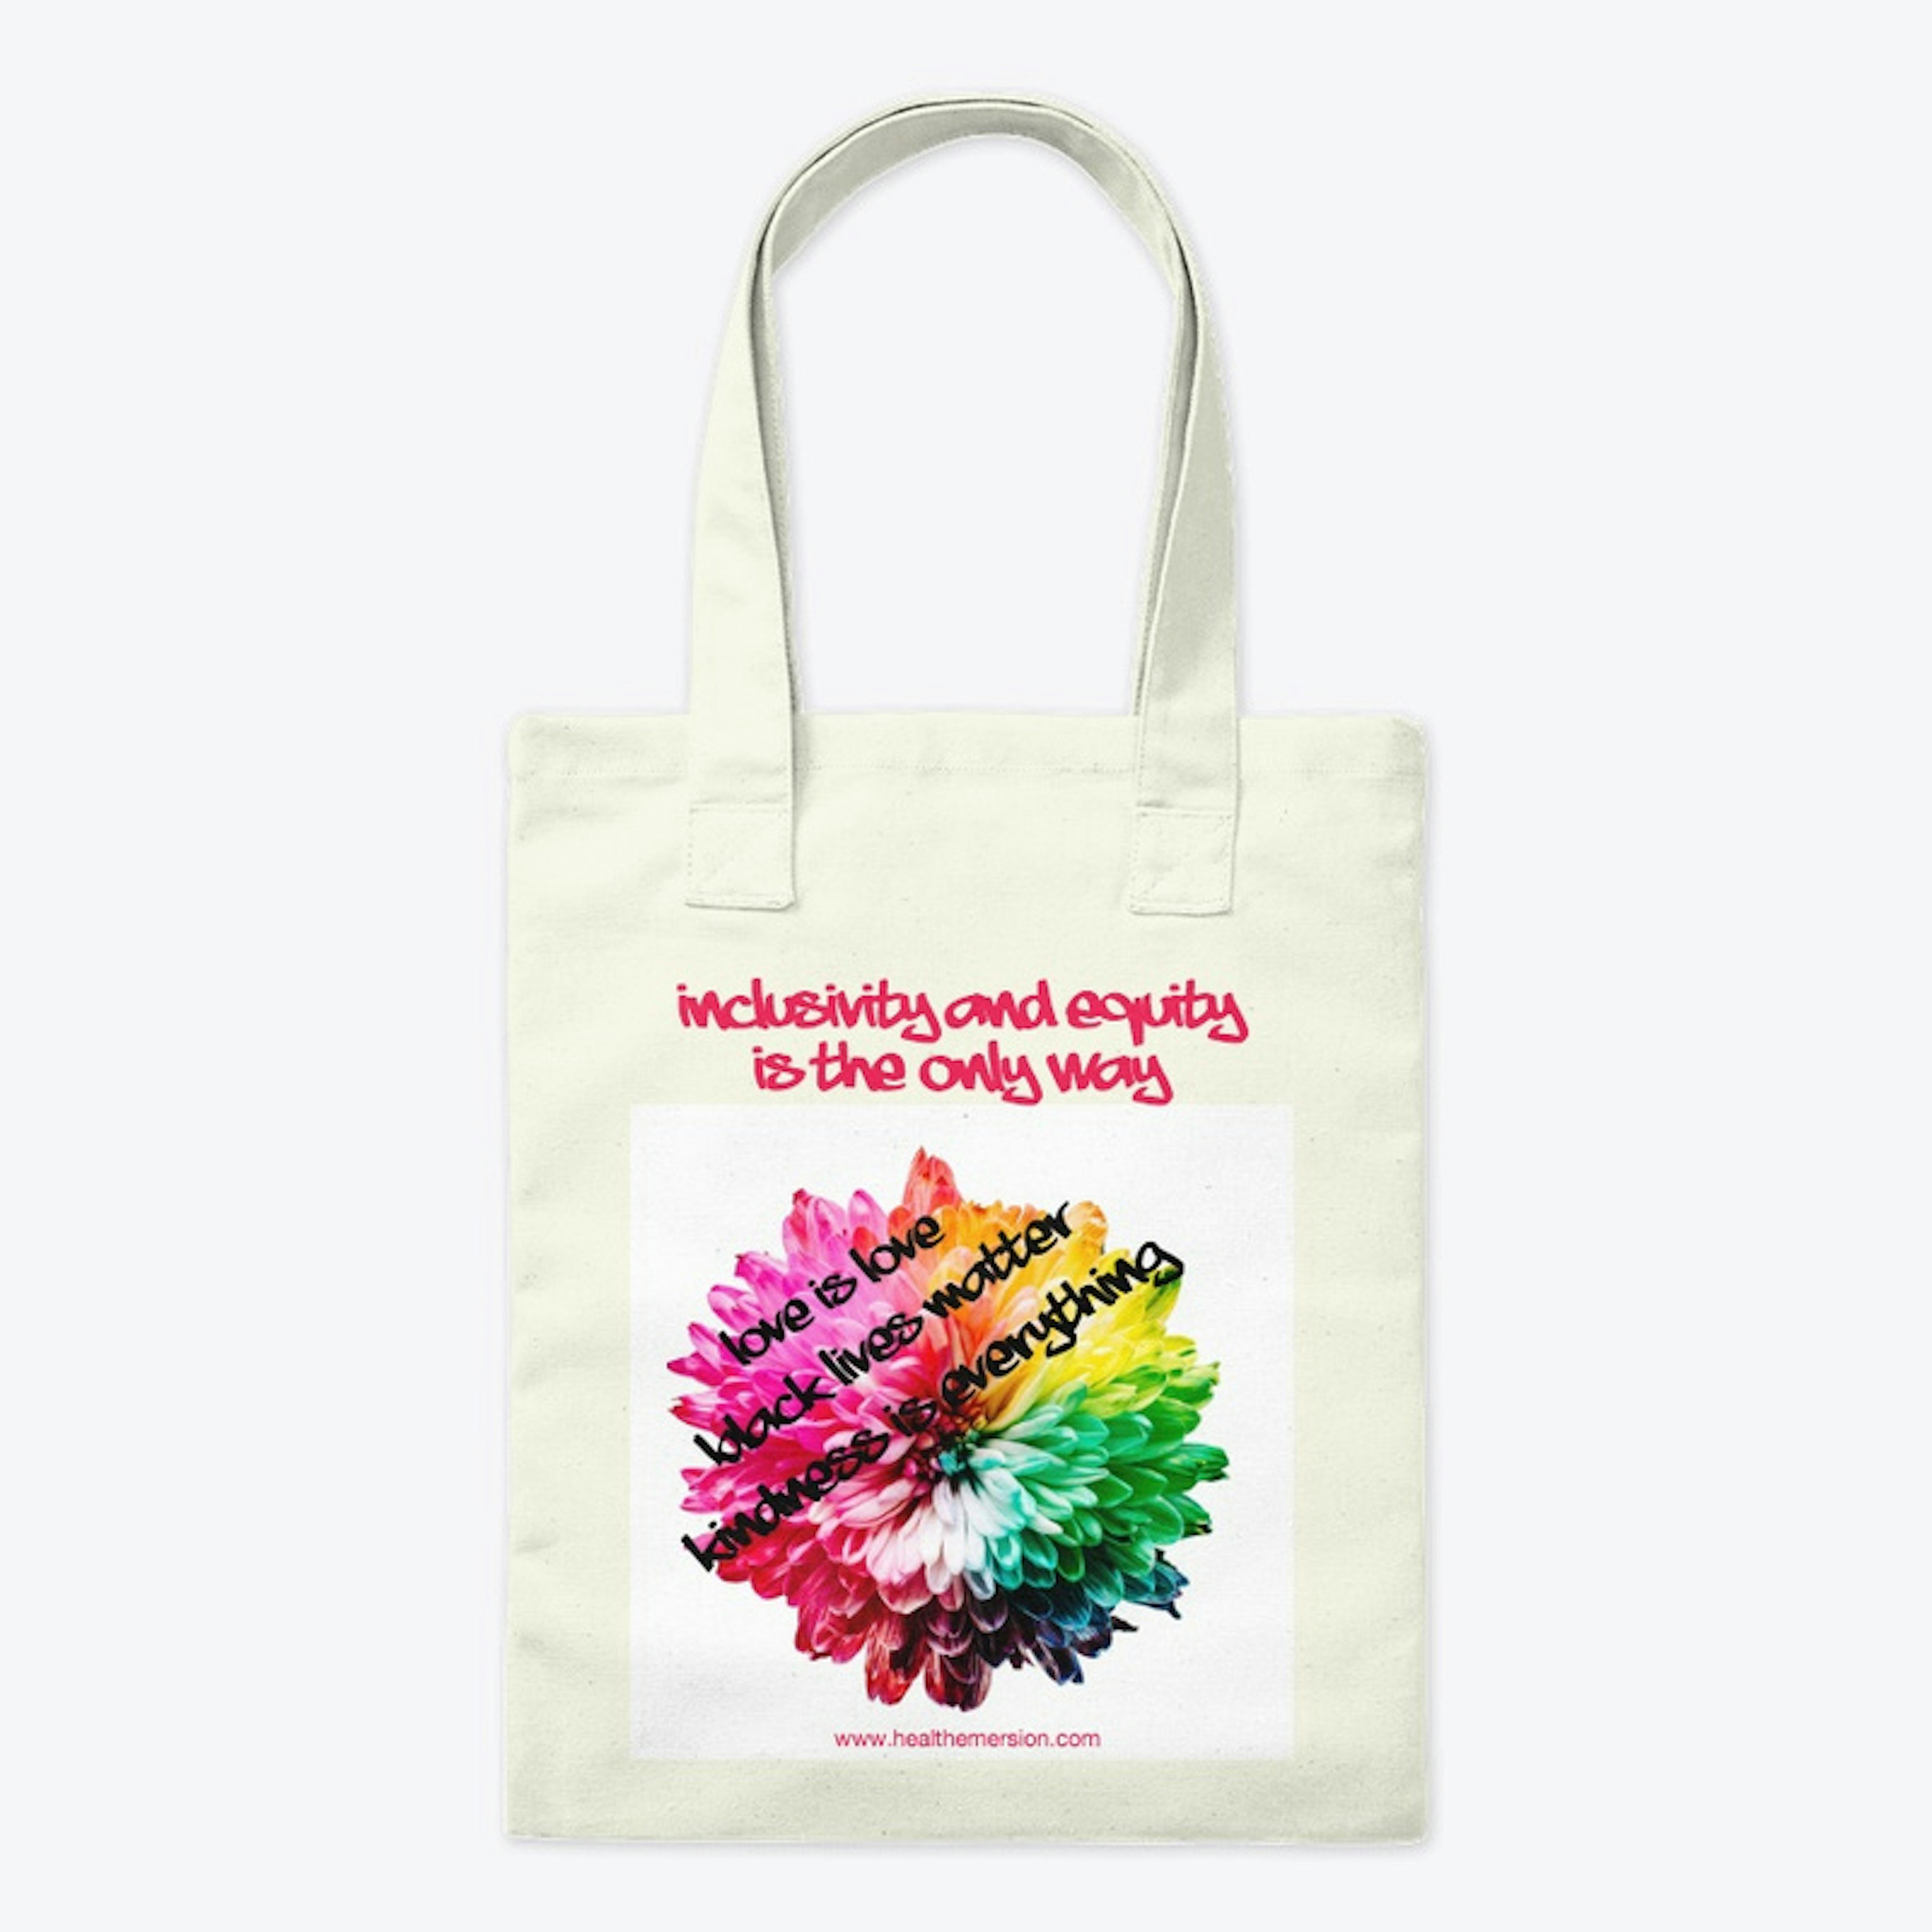 The Kindness Tote